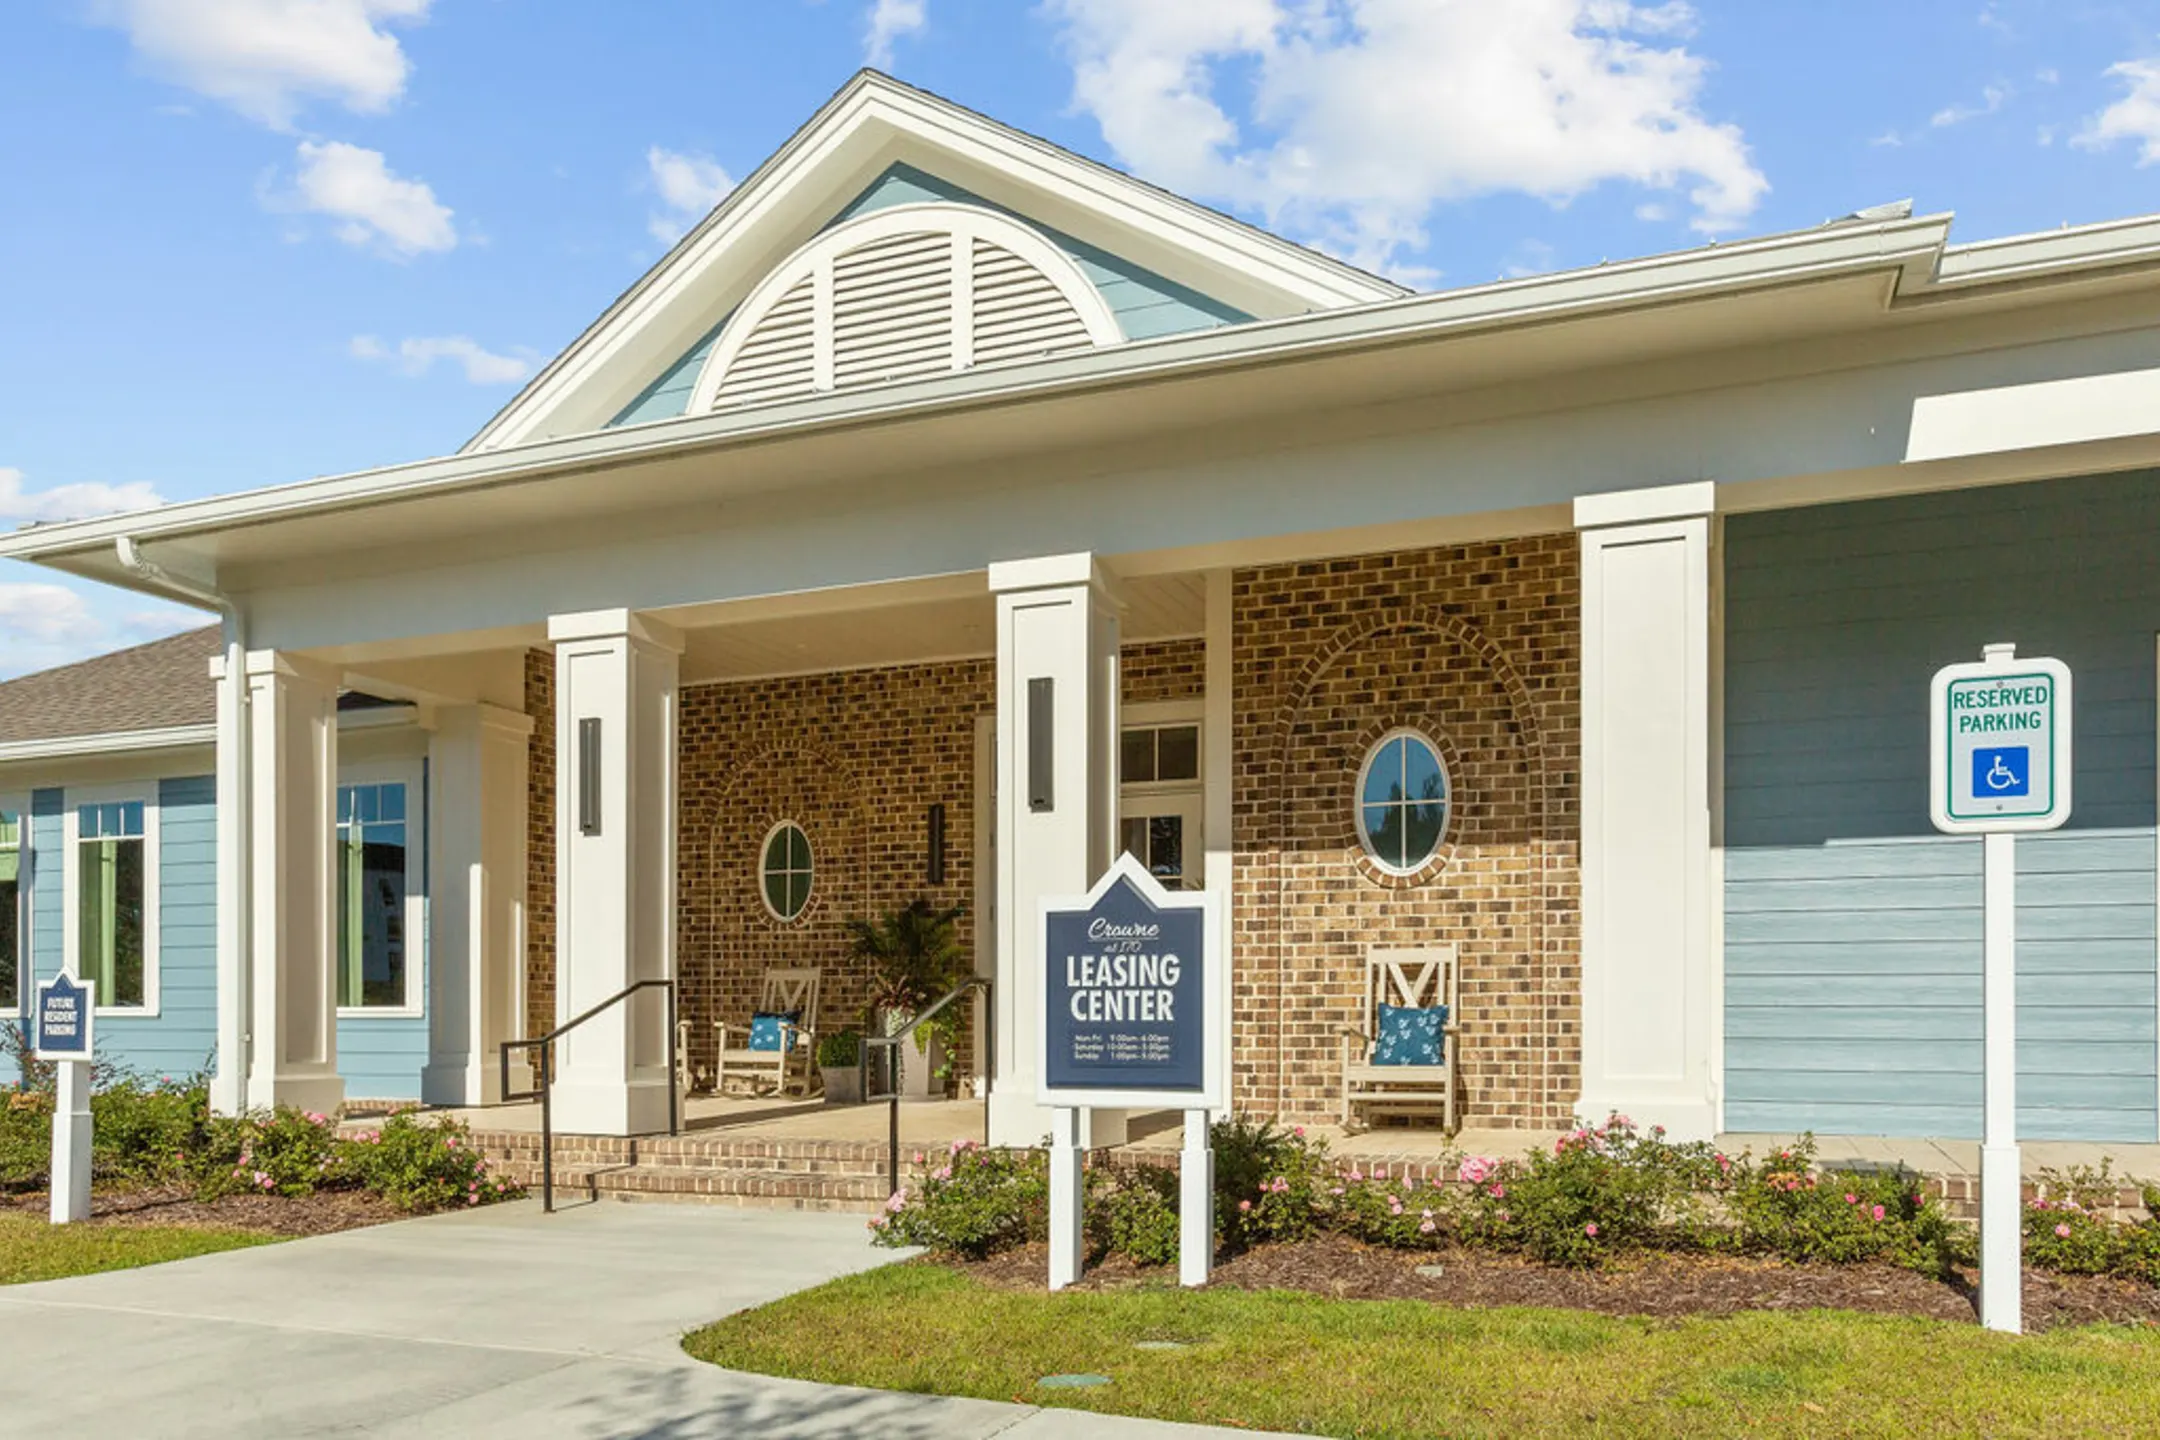 Building - Crowne at One Seventy - Bluffton, SC